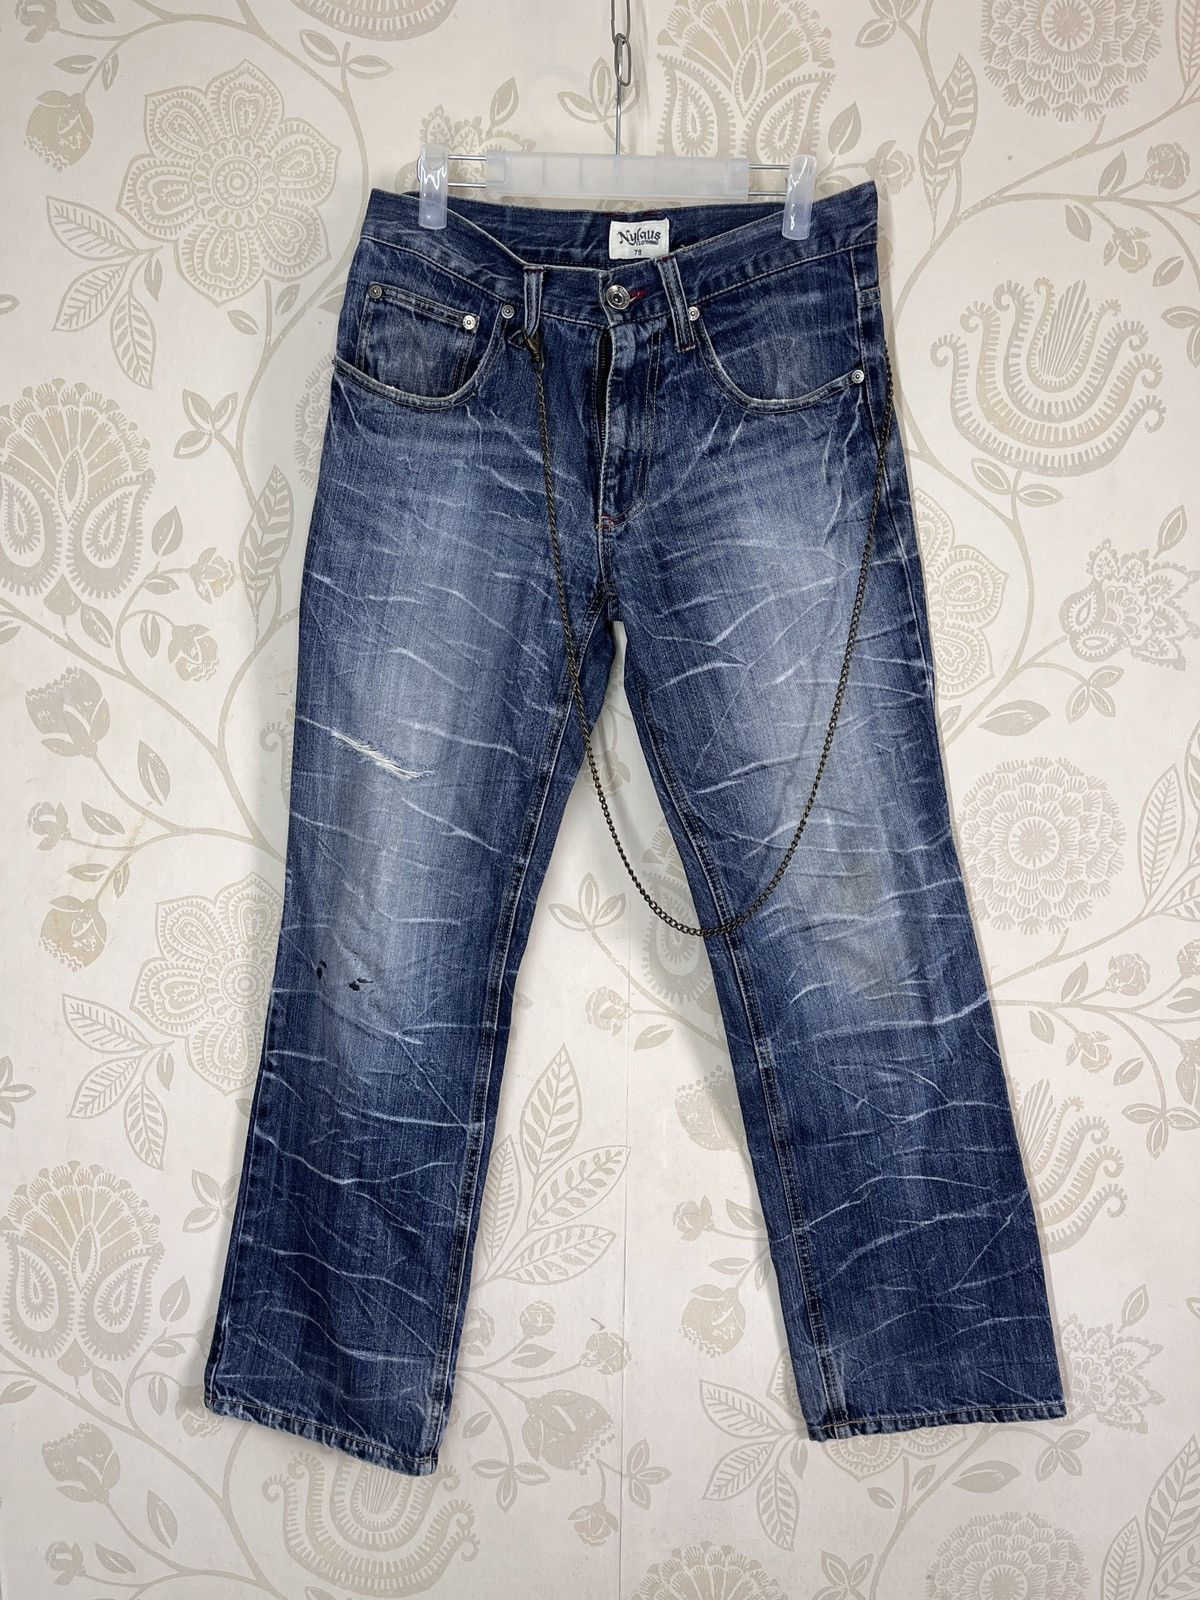 Japanese Brand - Nylaus Clothing Hysteric Style Denim Jeans Seditionaries - 2